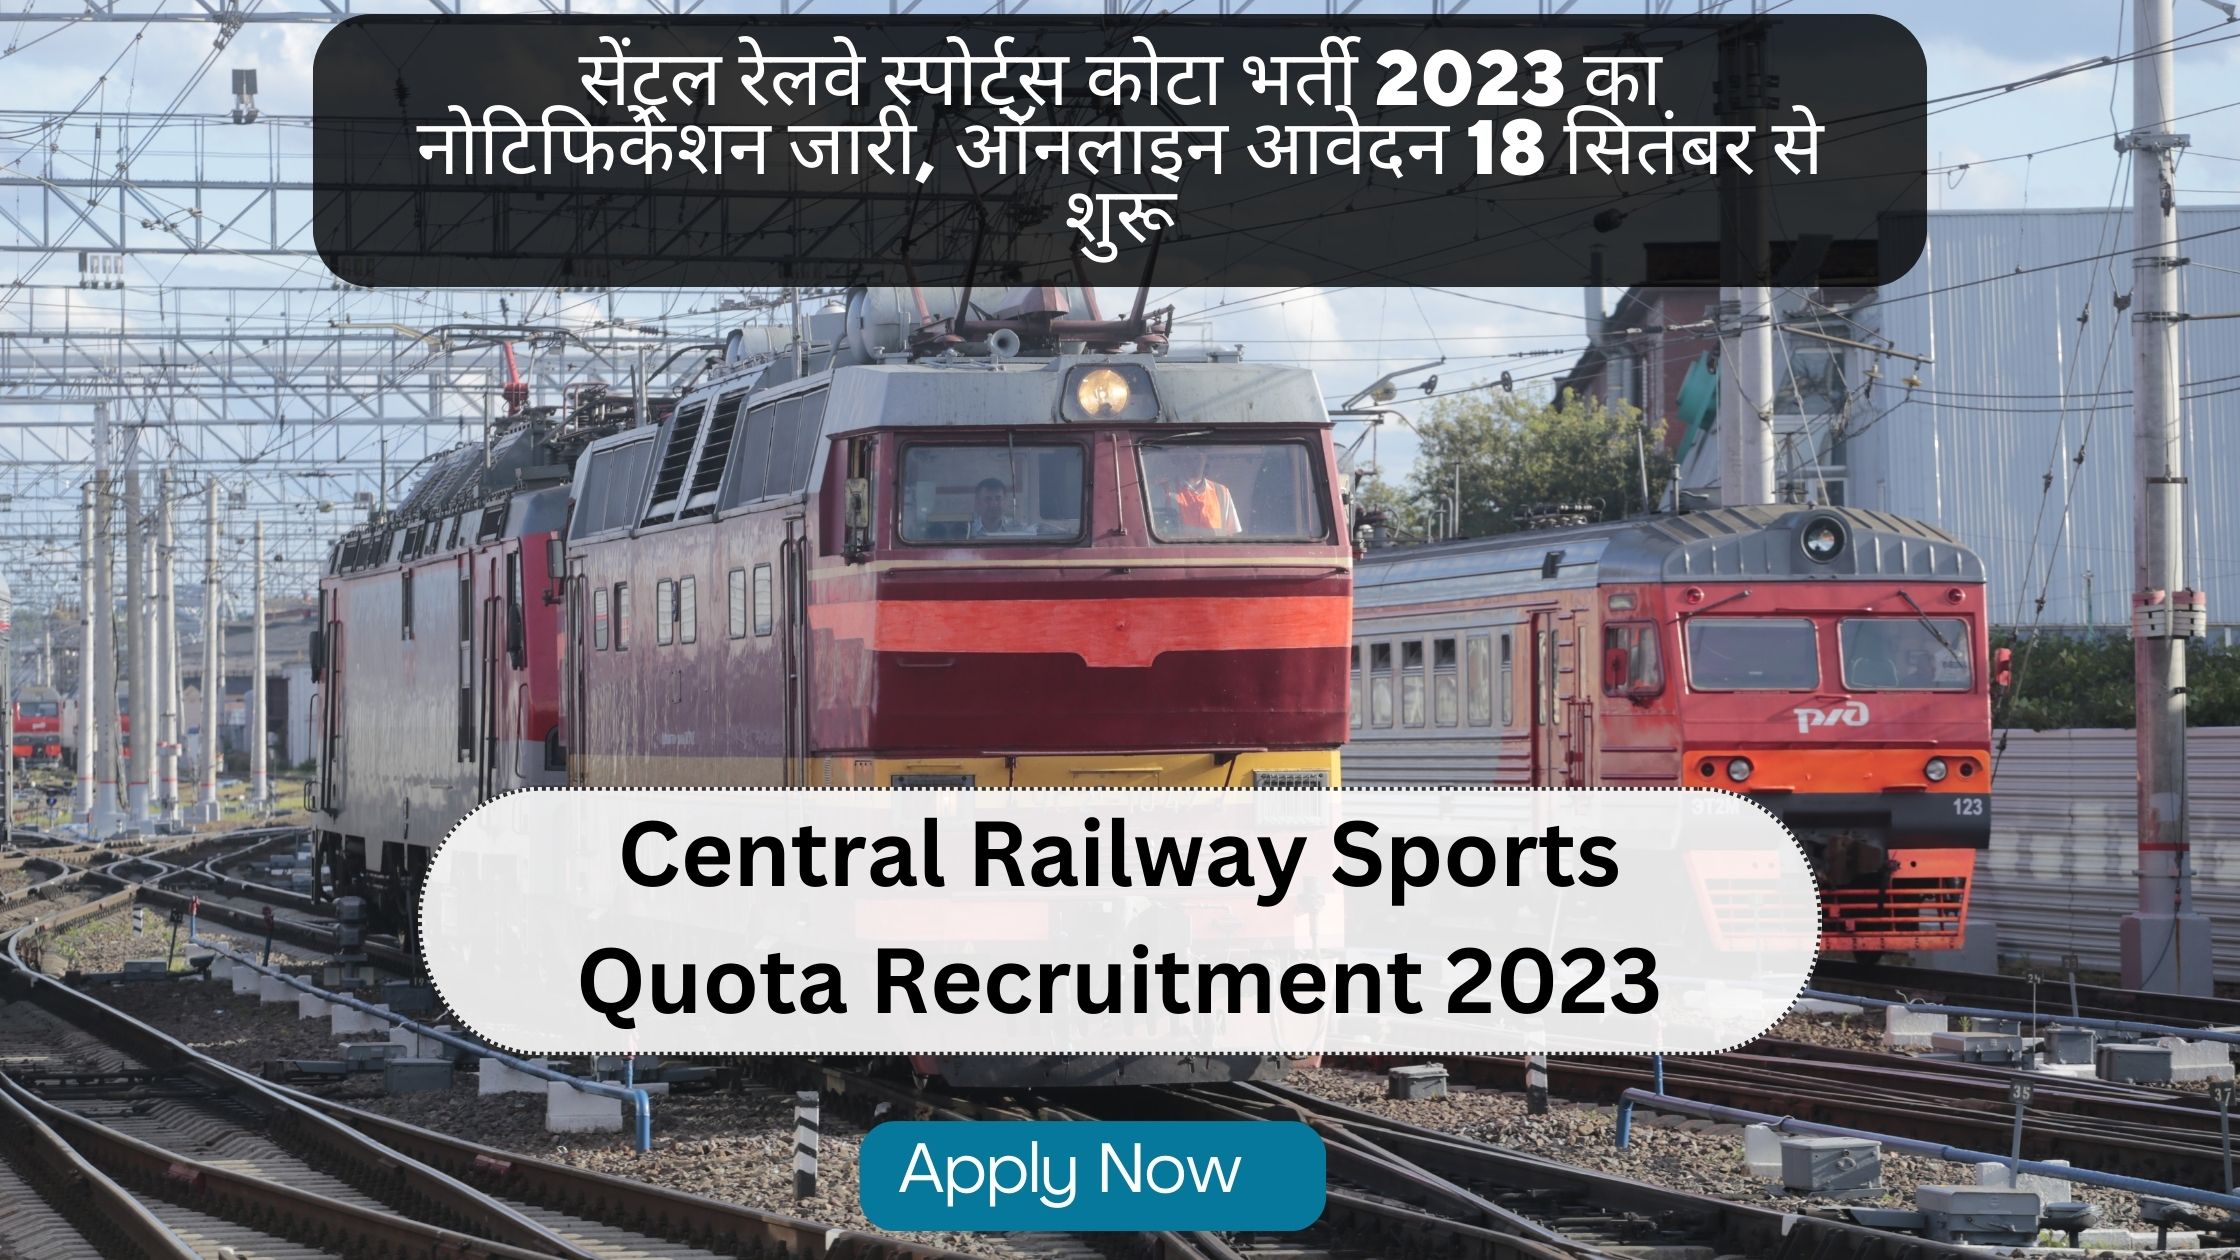 Central Railway Sports Quota Recruitment 2023 Apply Now